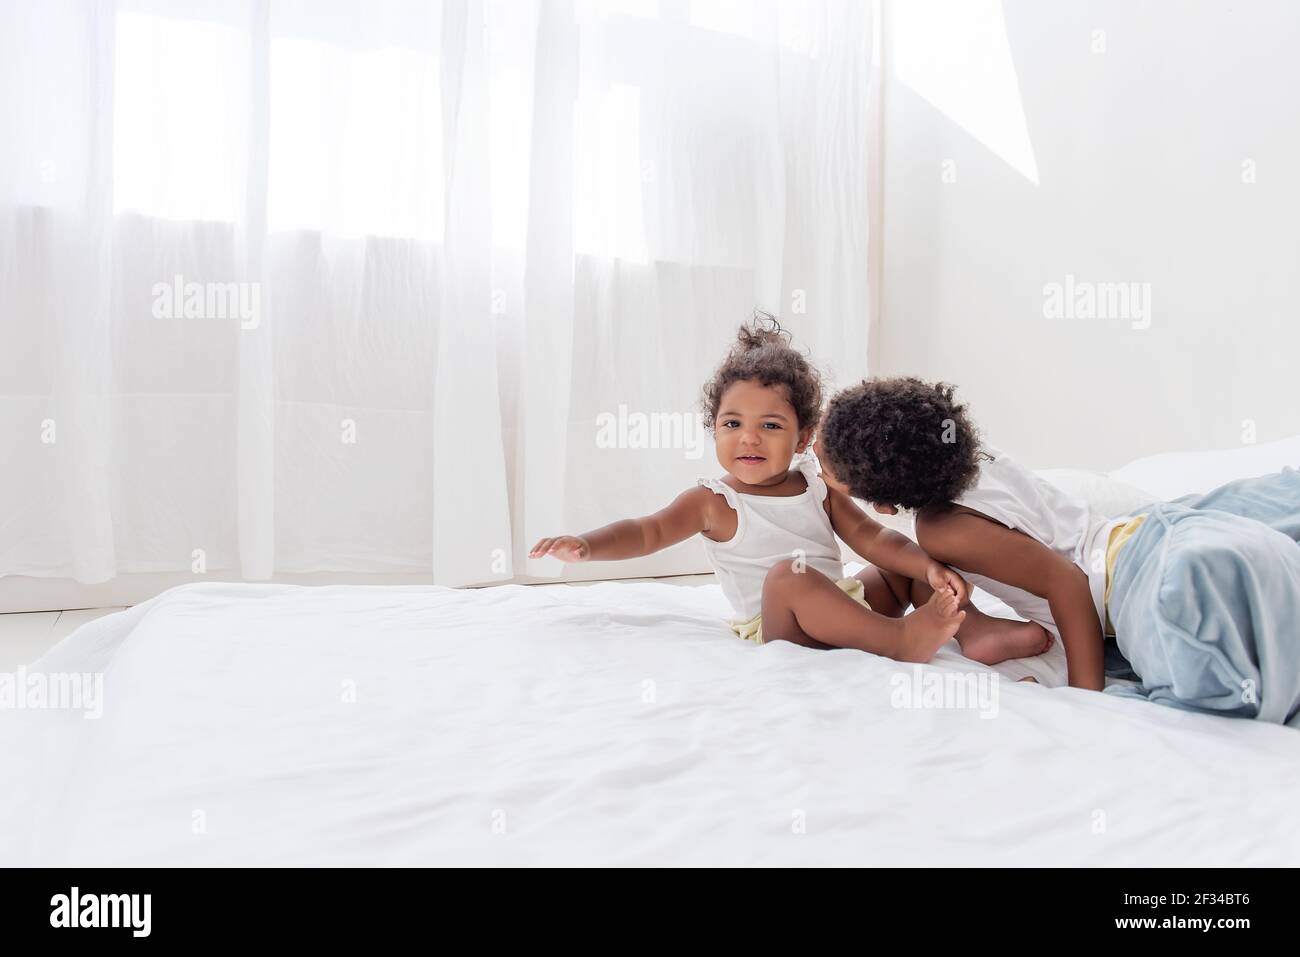 Brother and sister African Americans play together on white bed in loft interior. Siblings having fun among the blue pillows in the morning. Boy kissi Stock Photo